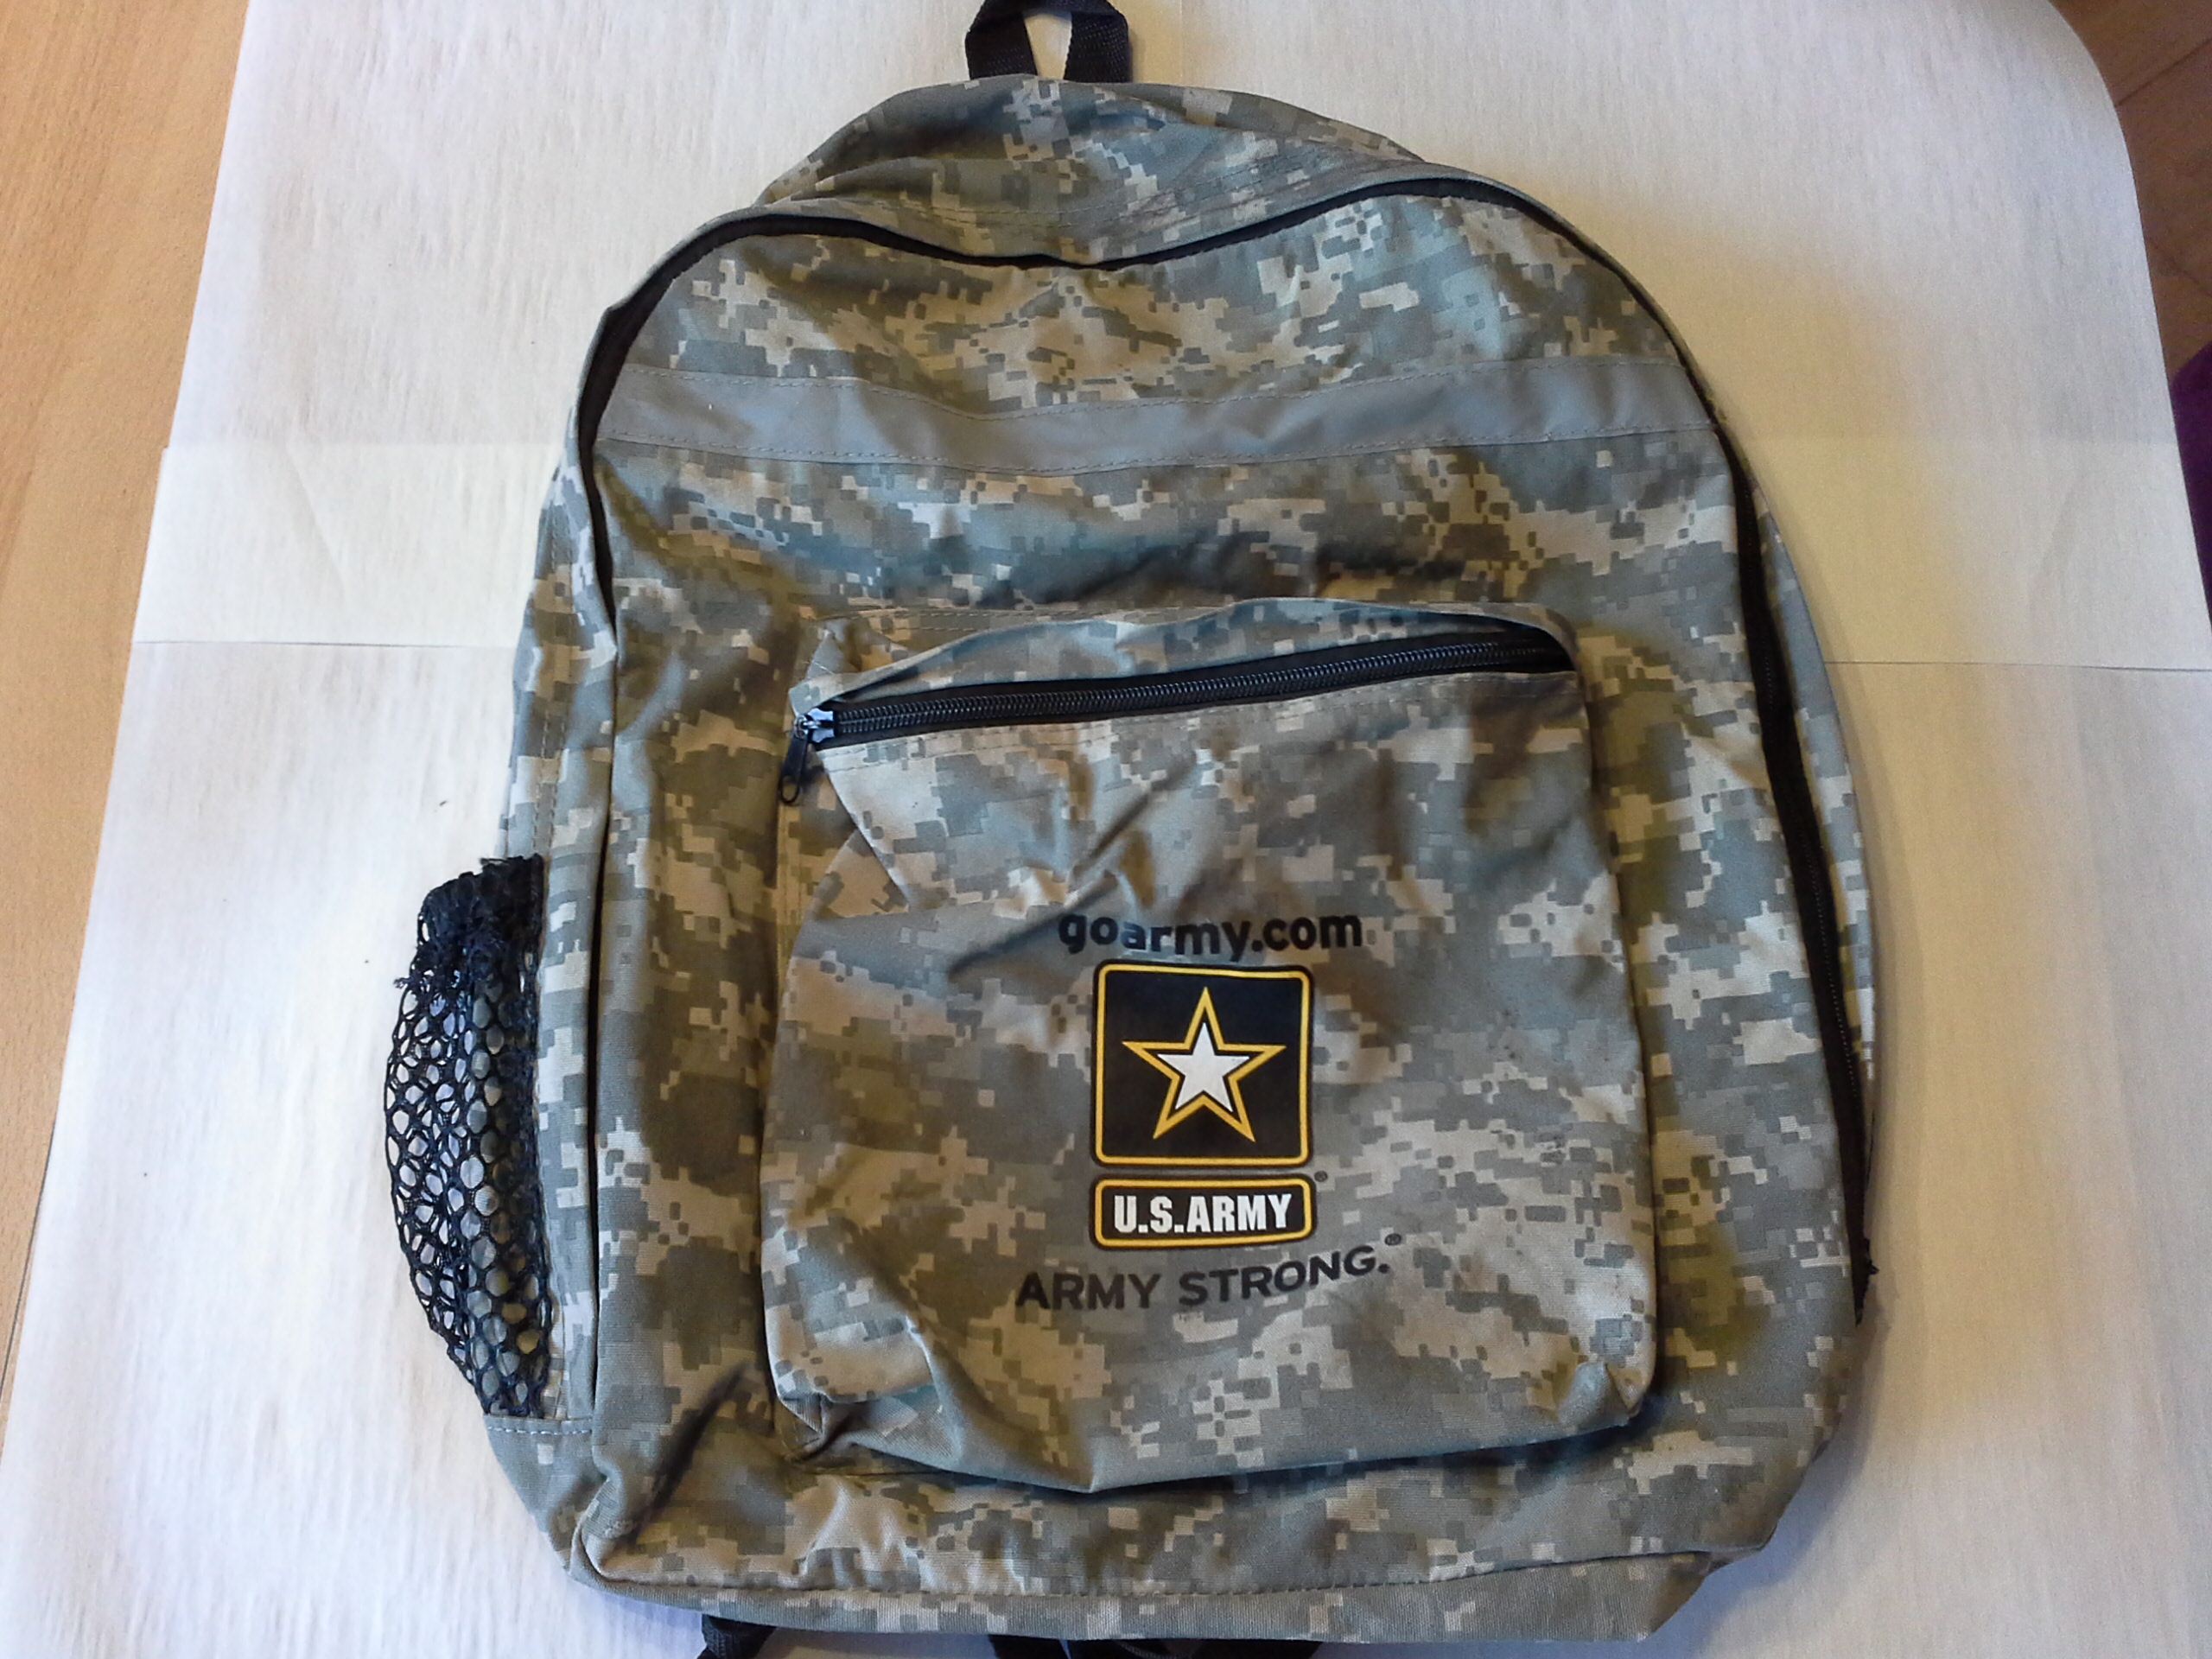 US Army Go Army Strong Rucksack